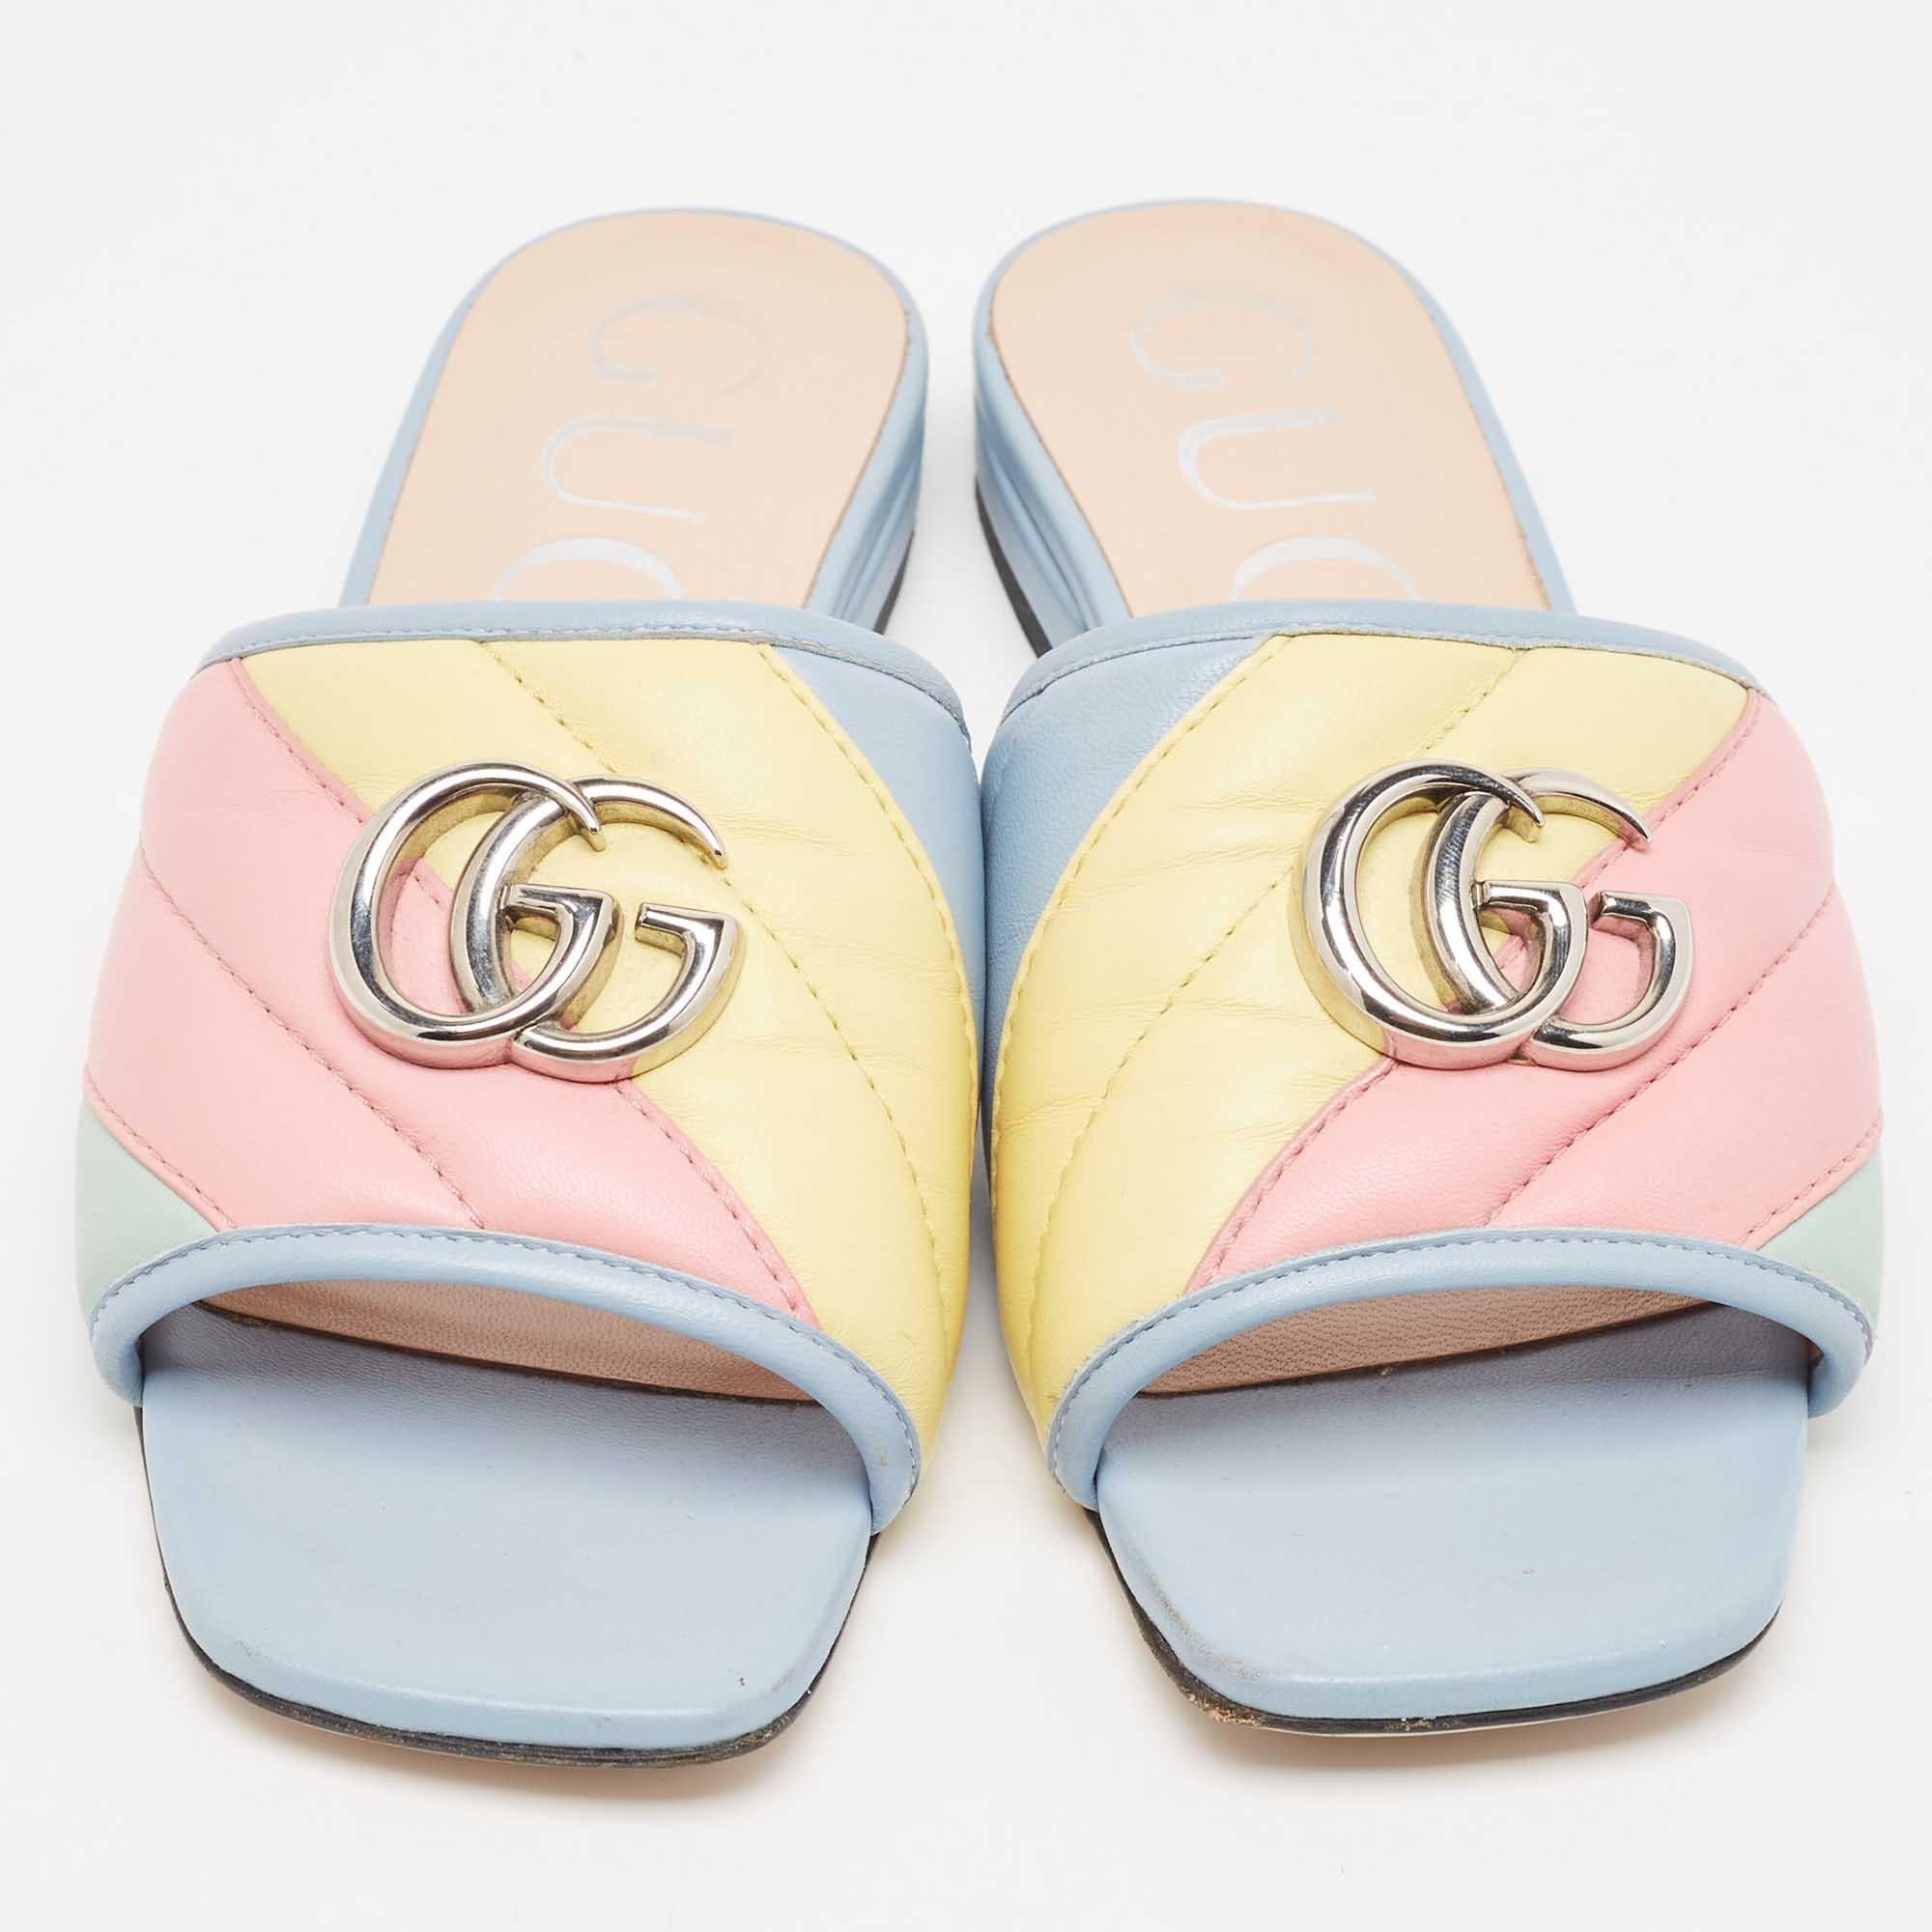 Presented by Gucci, these GG Marmont flat slides will adorn your feet with their chic aesthetics, charm, and signature beauty. They are fashioned in multicolor Matelassé leather, with a silver-toned GG motif placed on the upper. Infuse a dash of